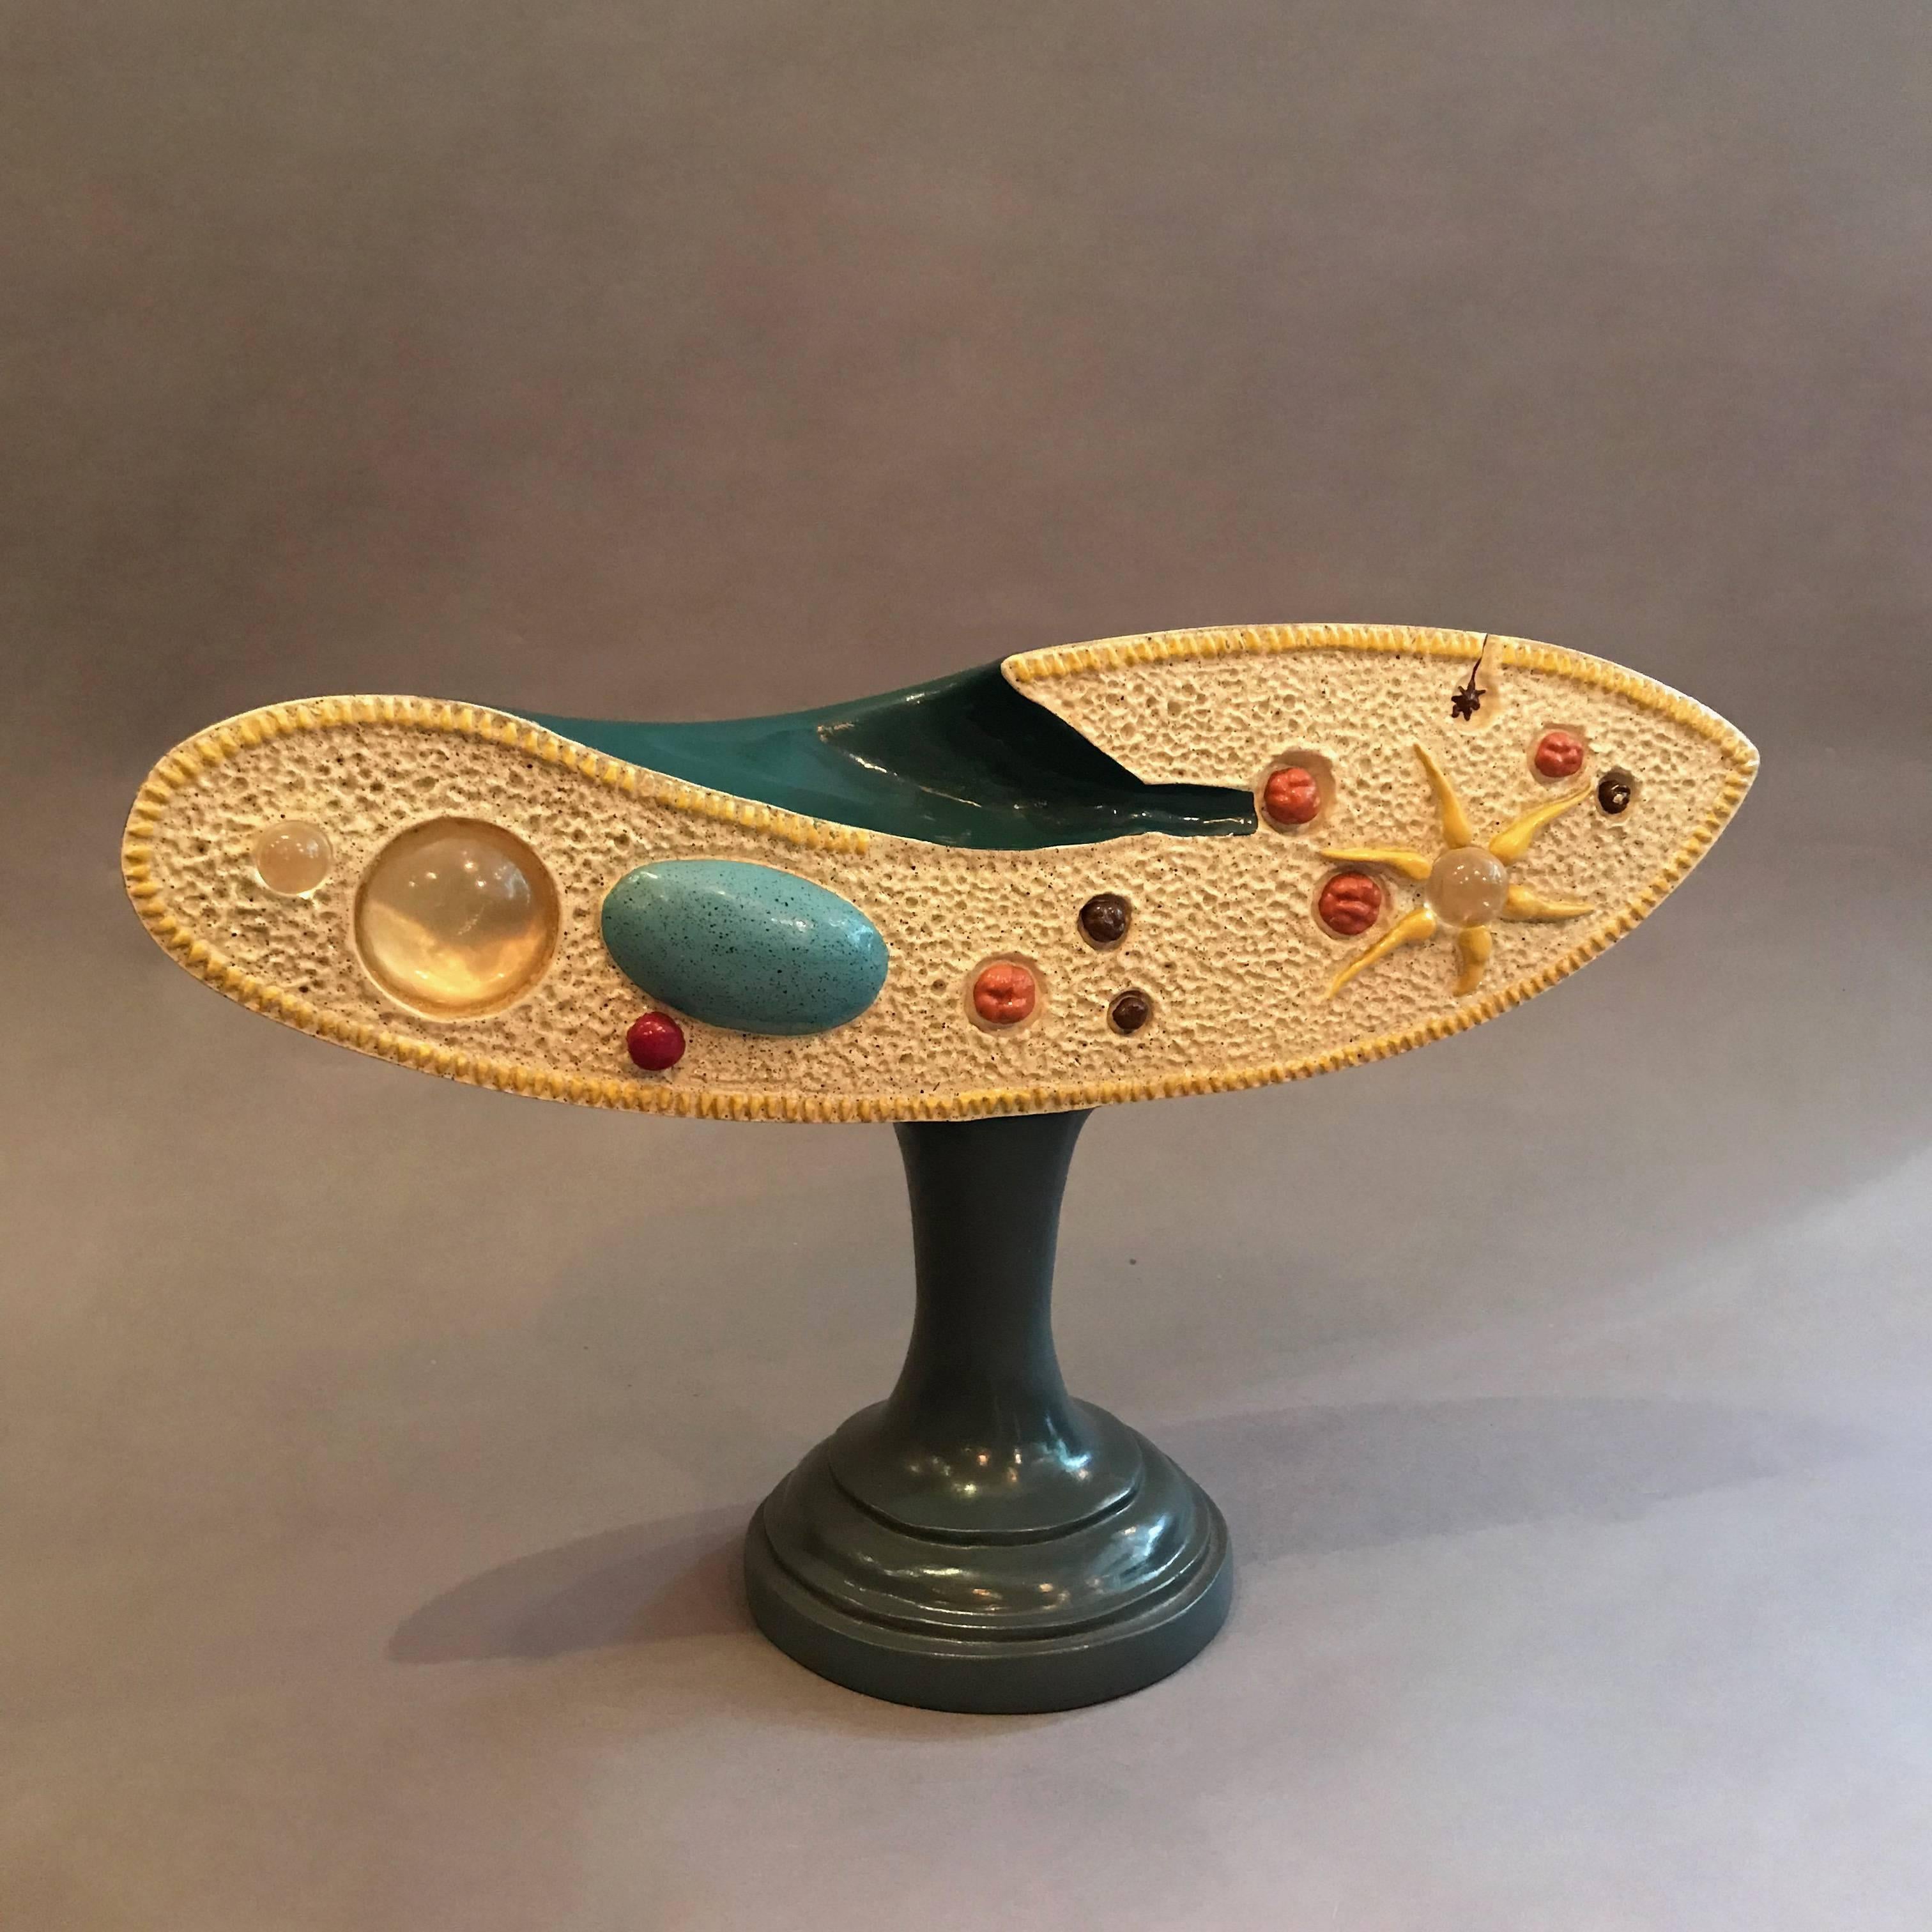 Painted resin composite, scientific, educational, zoological model of a paramecium - single-cell fresh water animal - by the Sargent Welch Scientific Company.

 